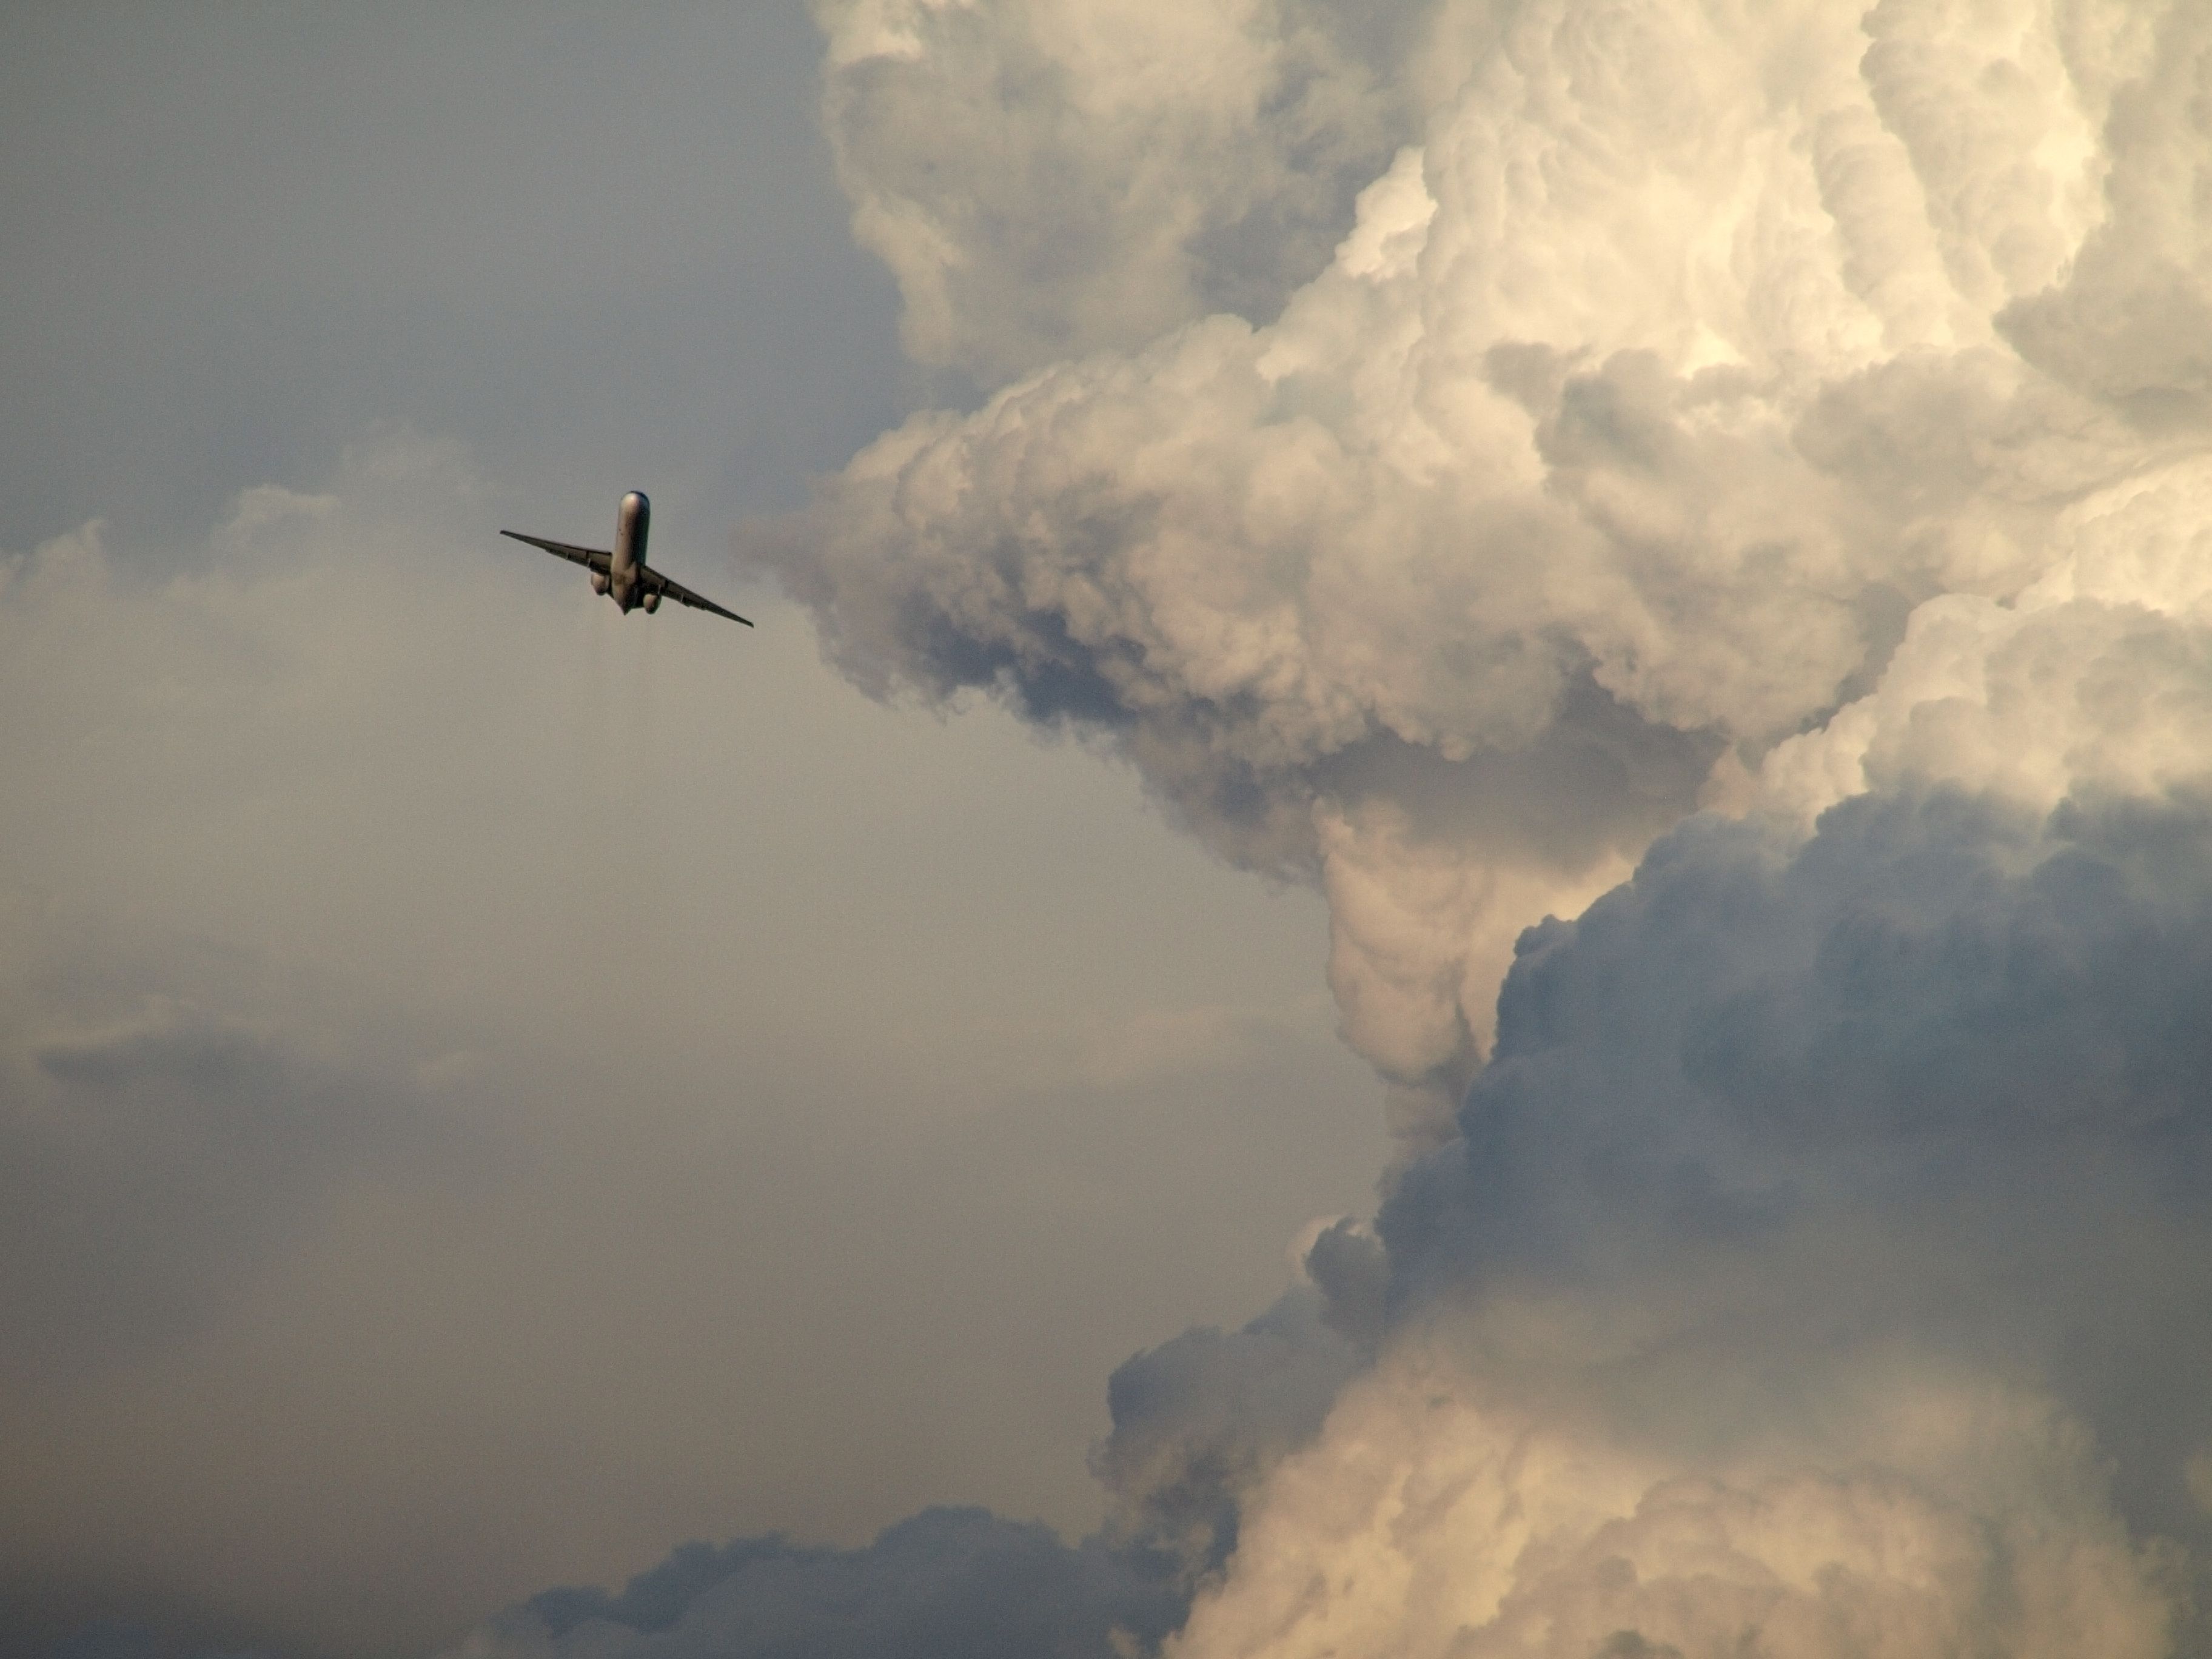 An aircraft flying into the clouds of a storm